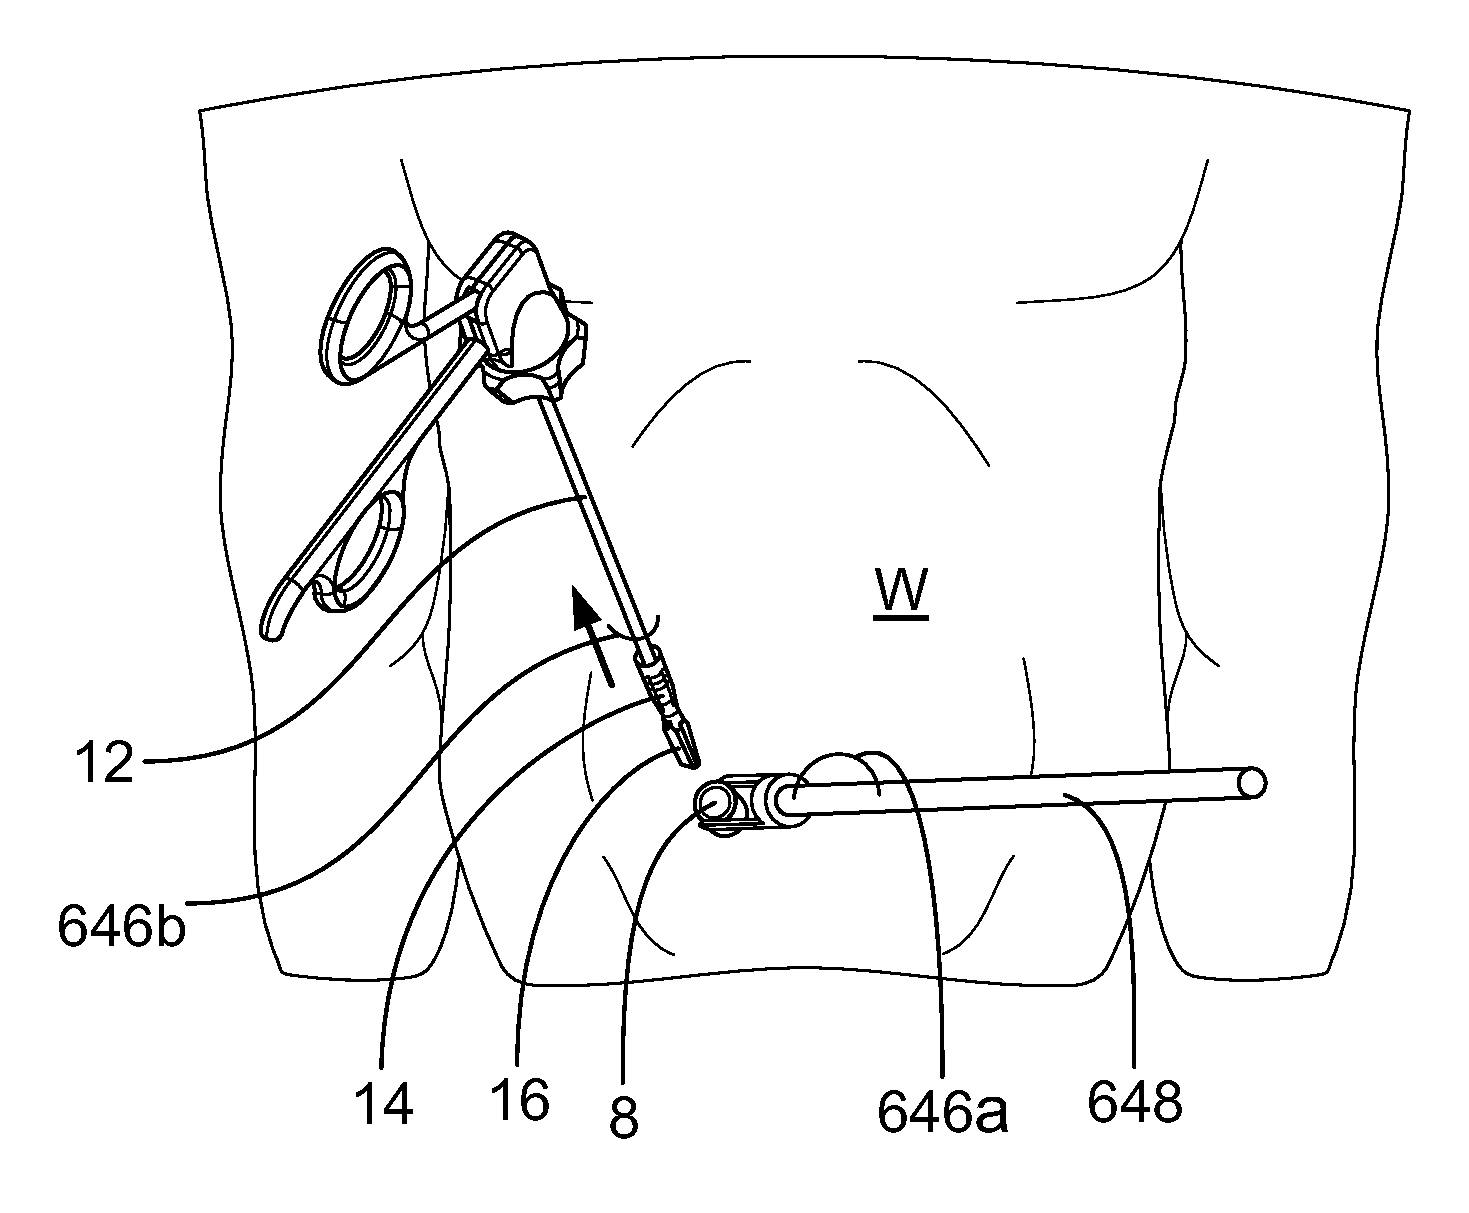 Surgical device and methods